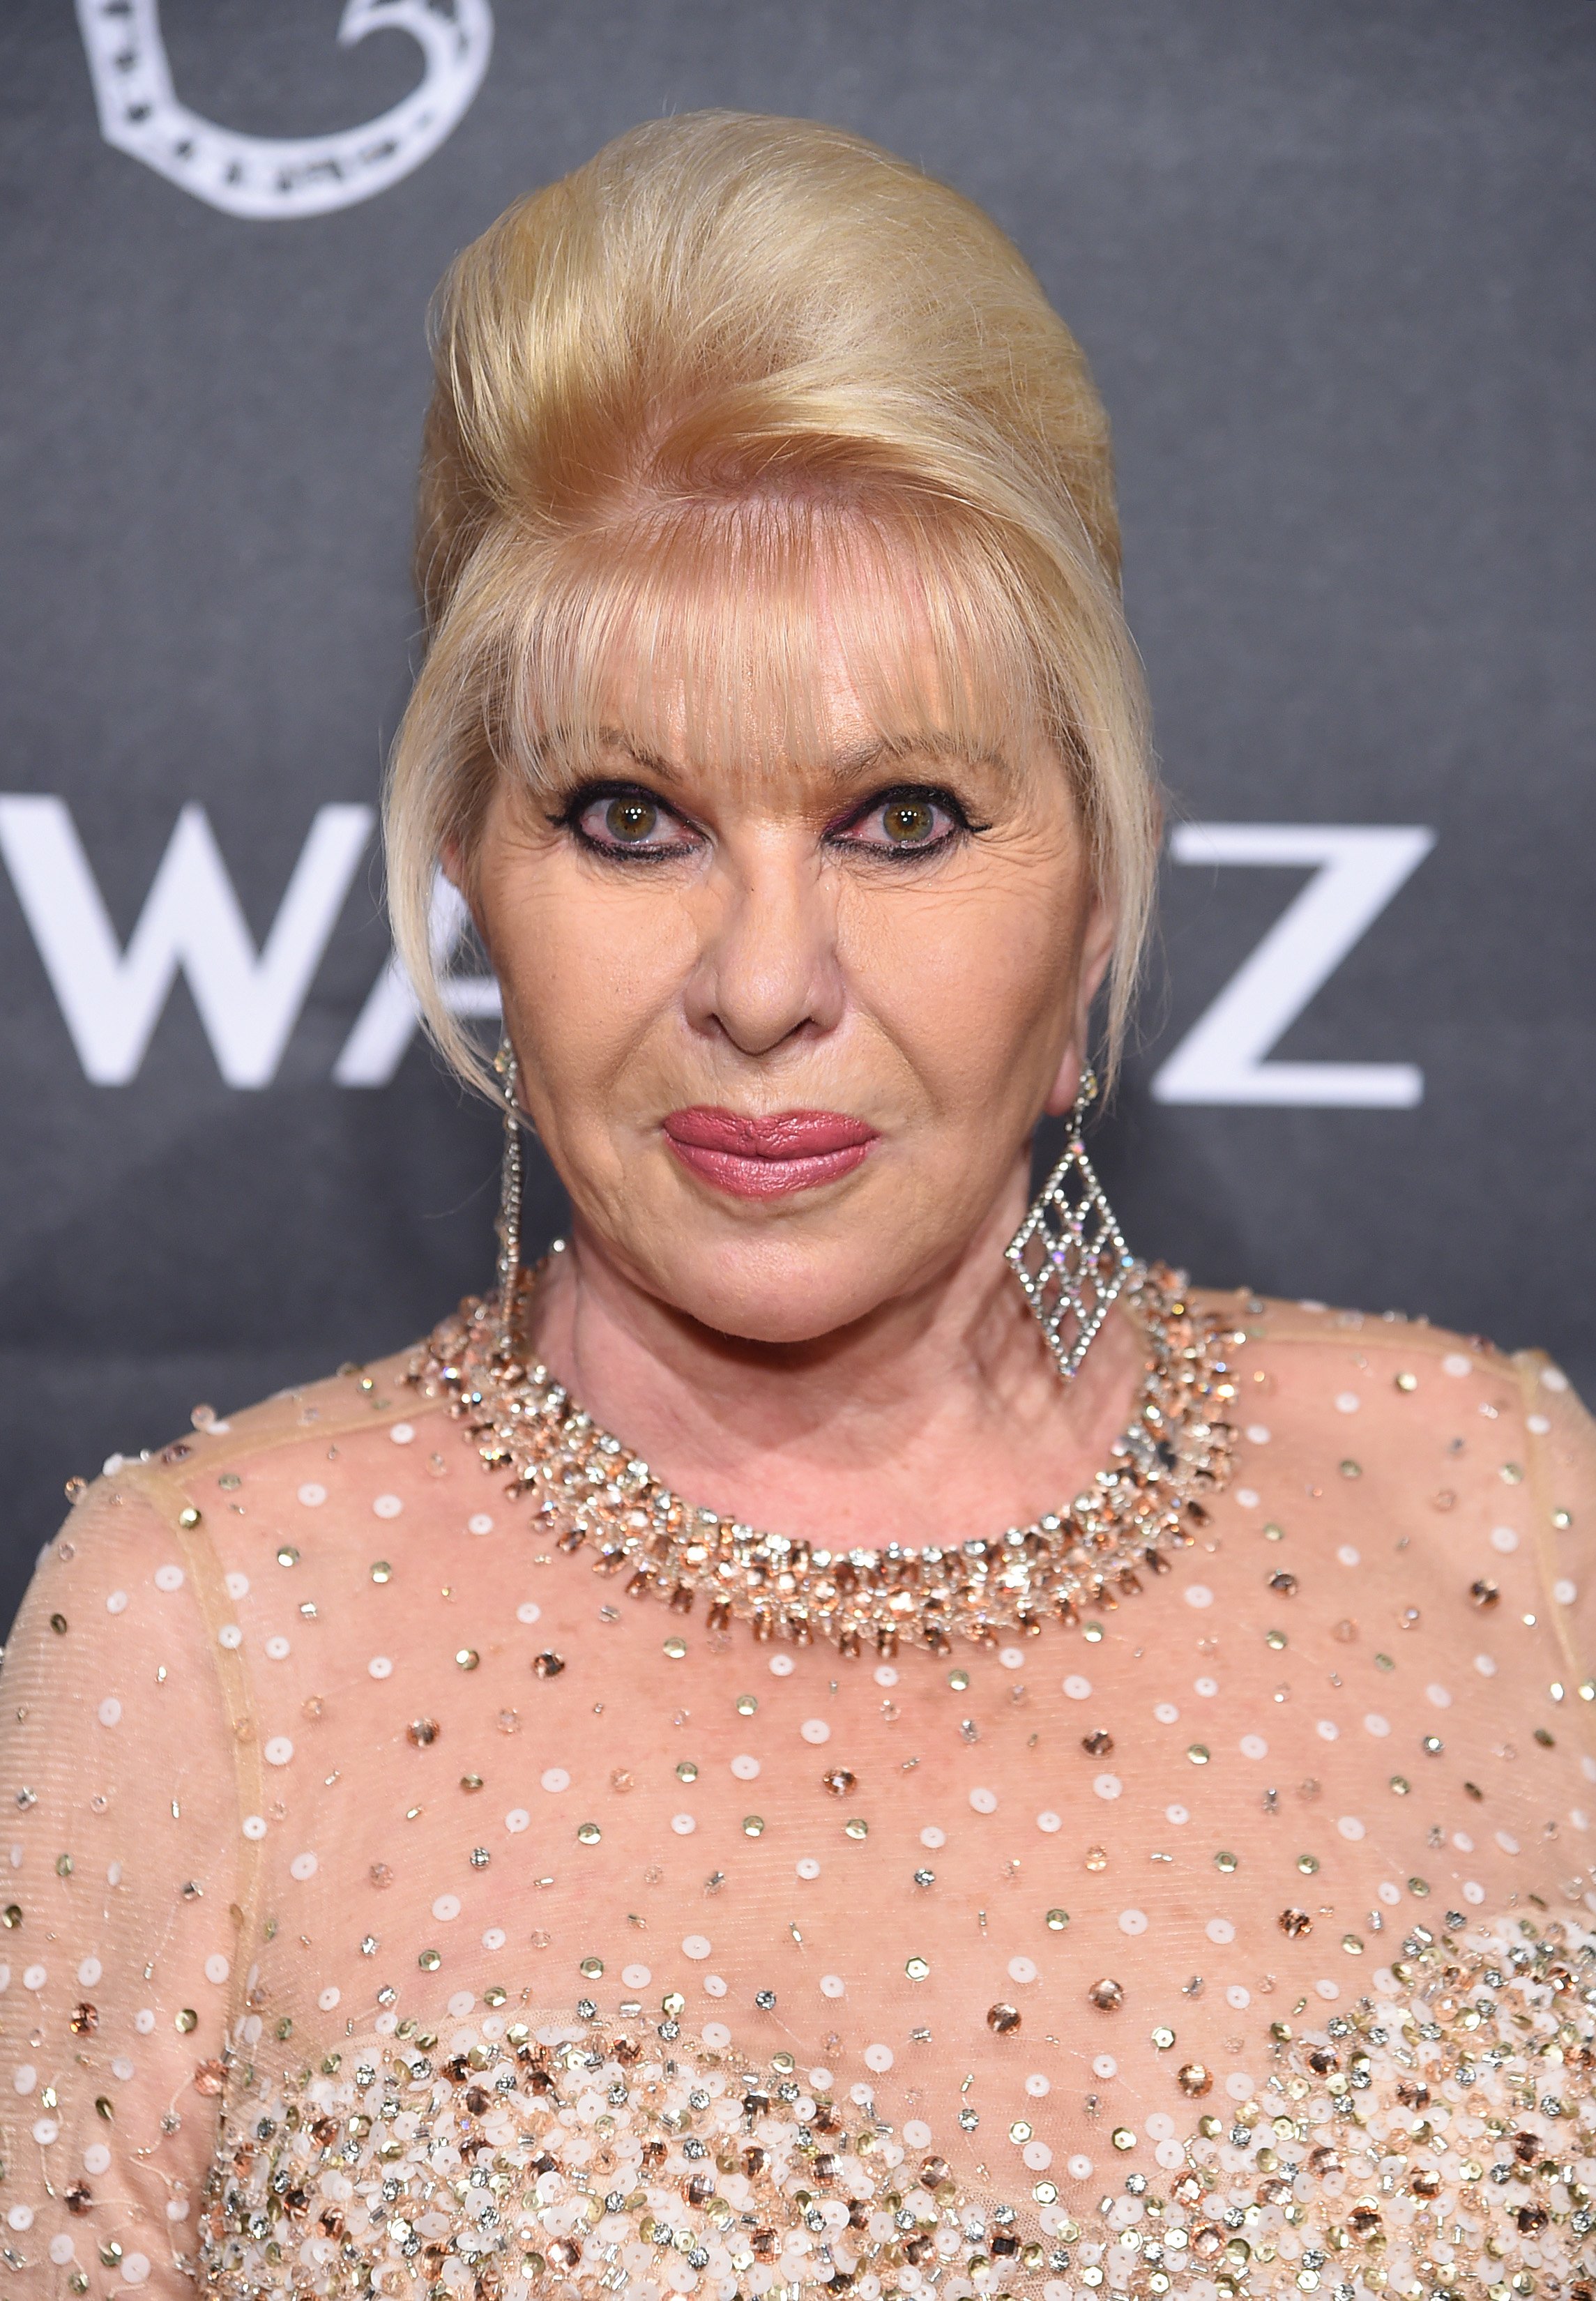 Businesswoman Ivana Trump attending the 2018 Angel Ball at Cipriani Wall Street on October 22, 2018 in New York City.┃Source: Getty Images